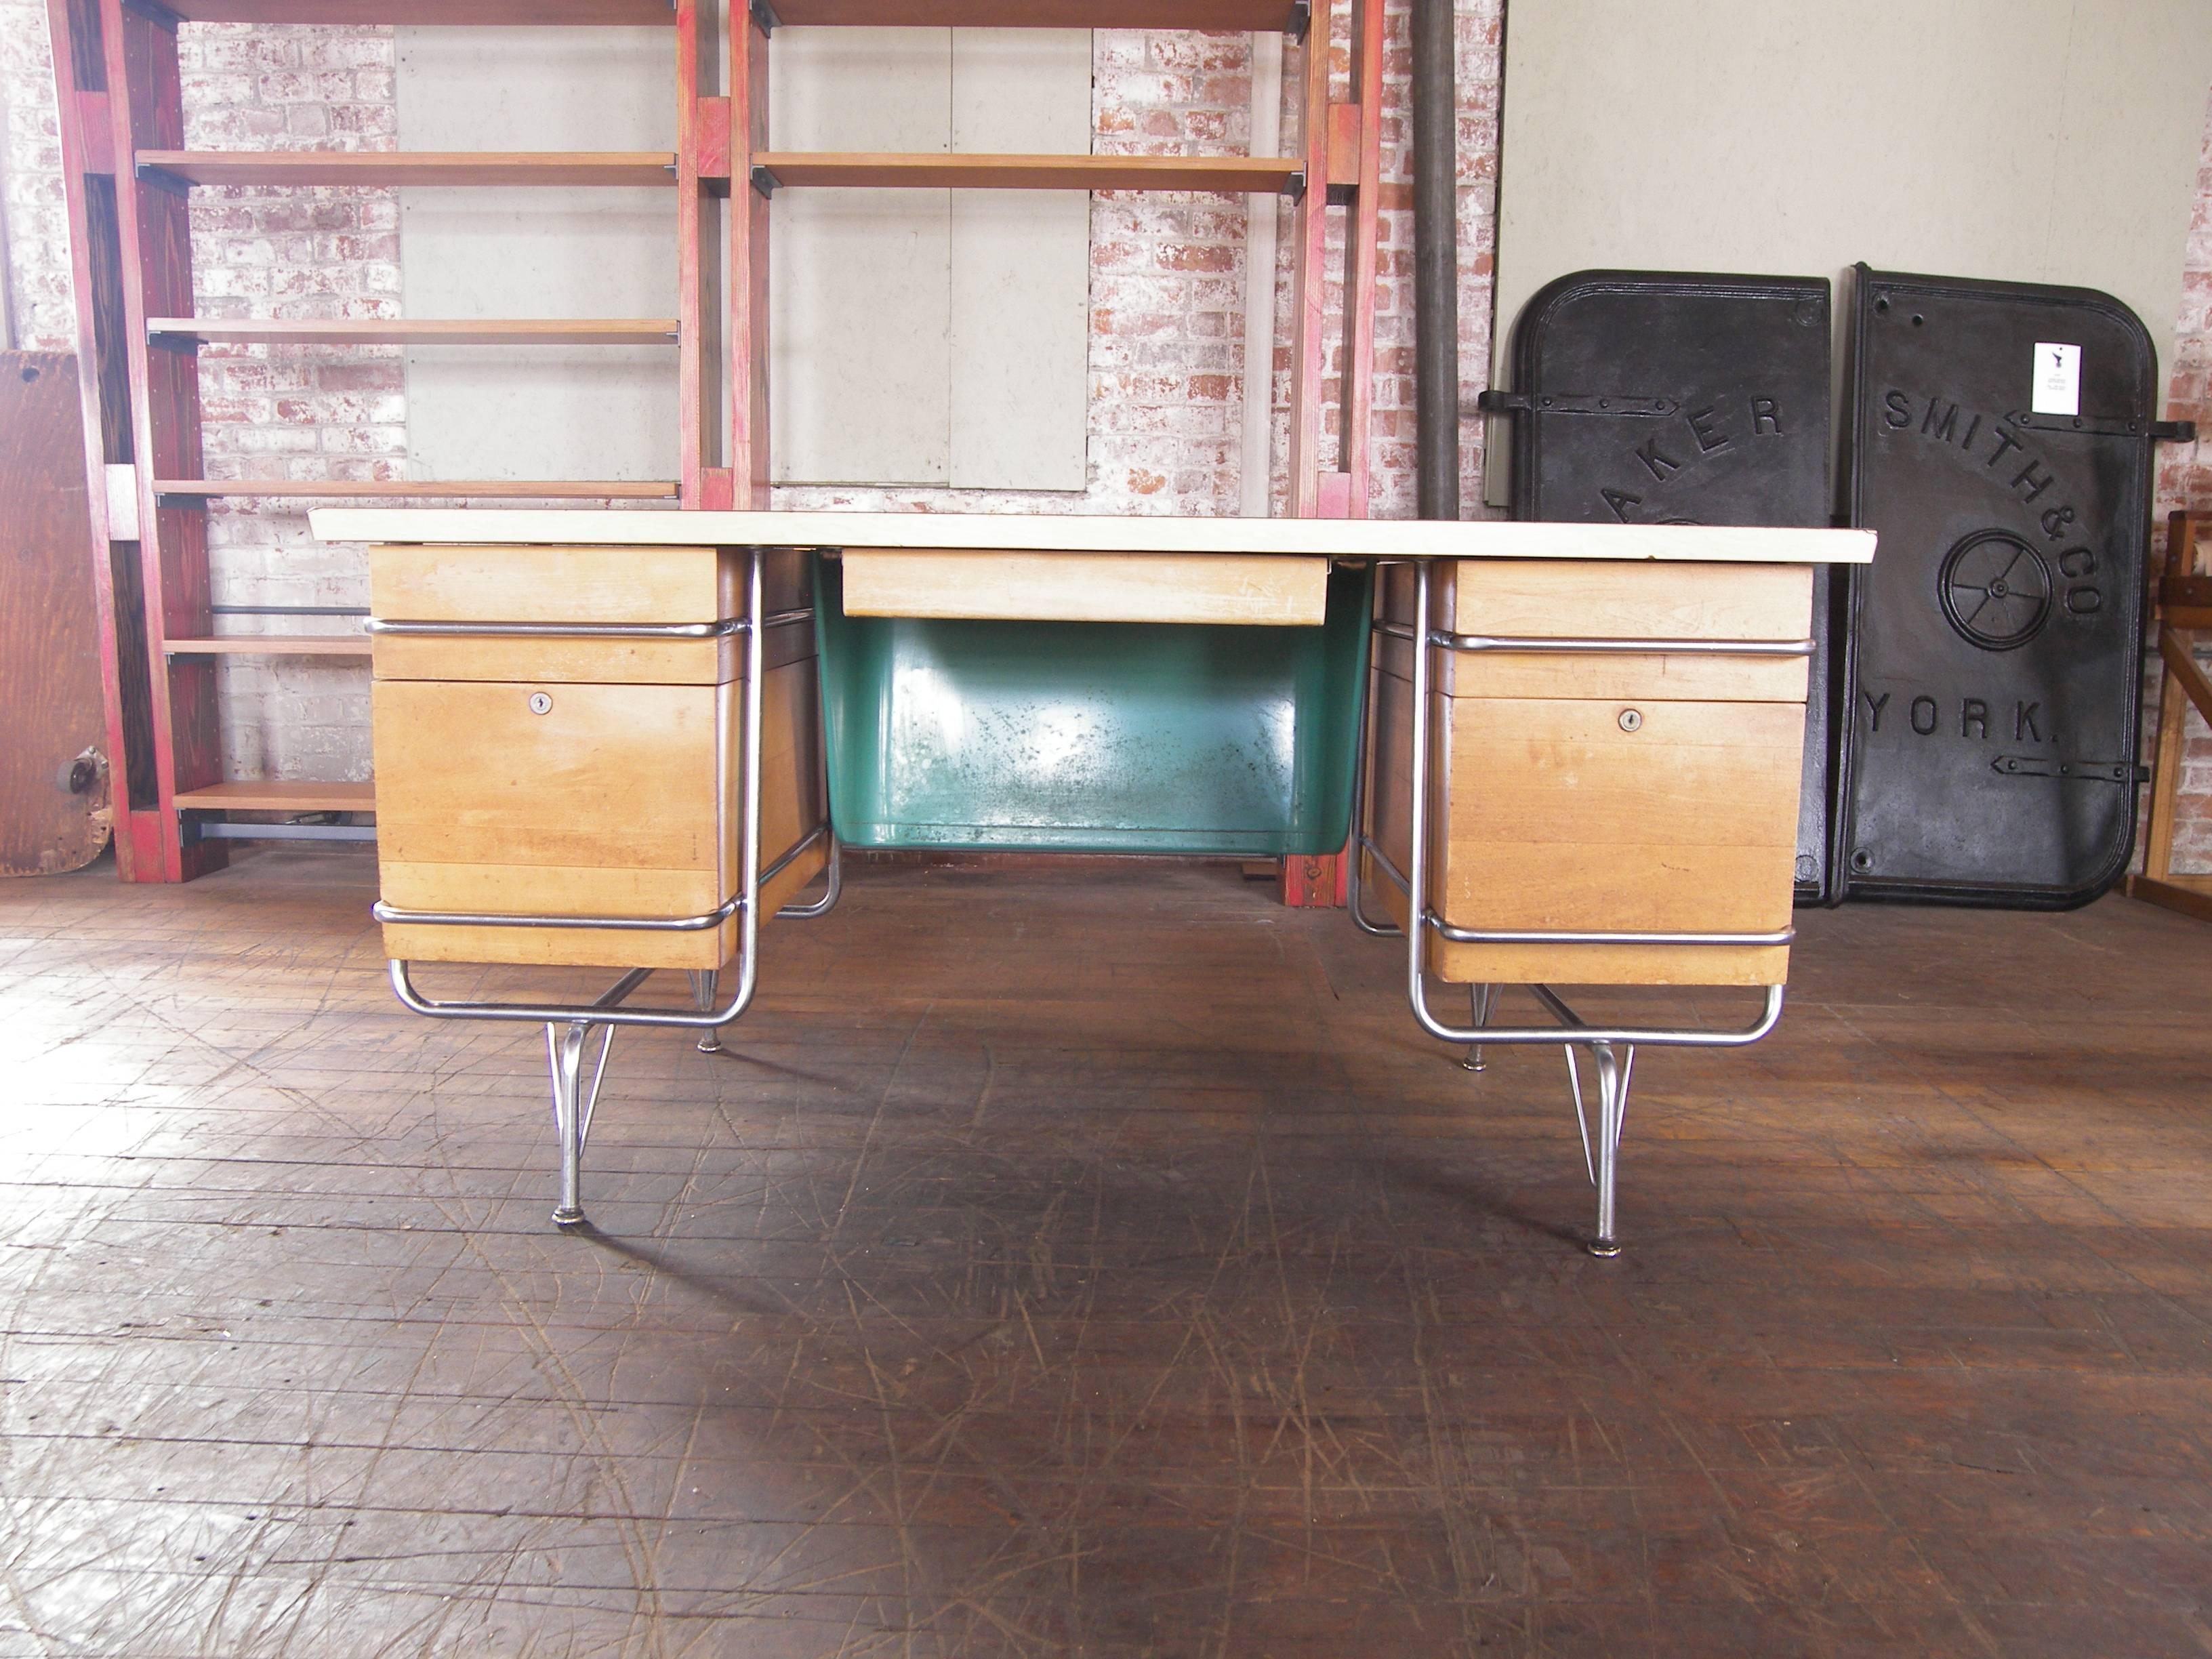 Authentic 1950s Mid-Century Modern Heywood-Wakefield Trimline model chrome and wood desk designed by KEM Weber. Overall dimensions measure 59 3/4